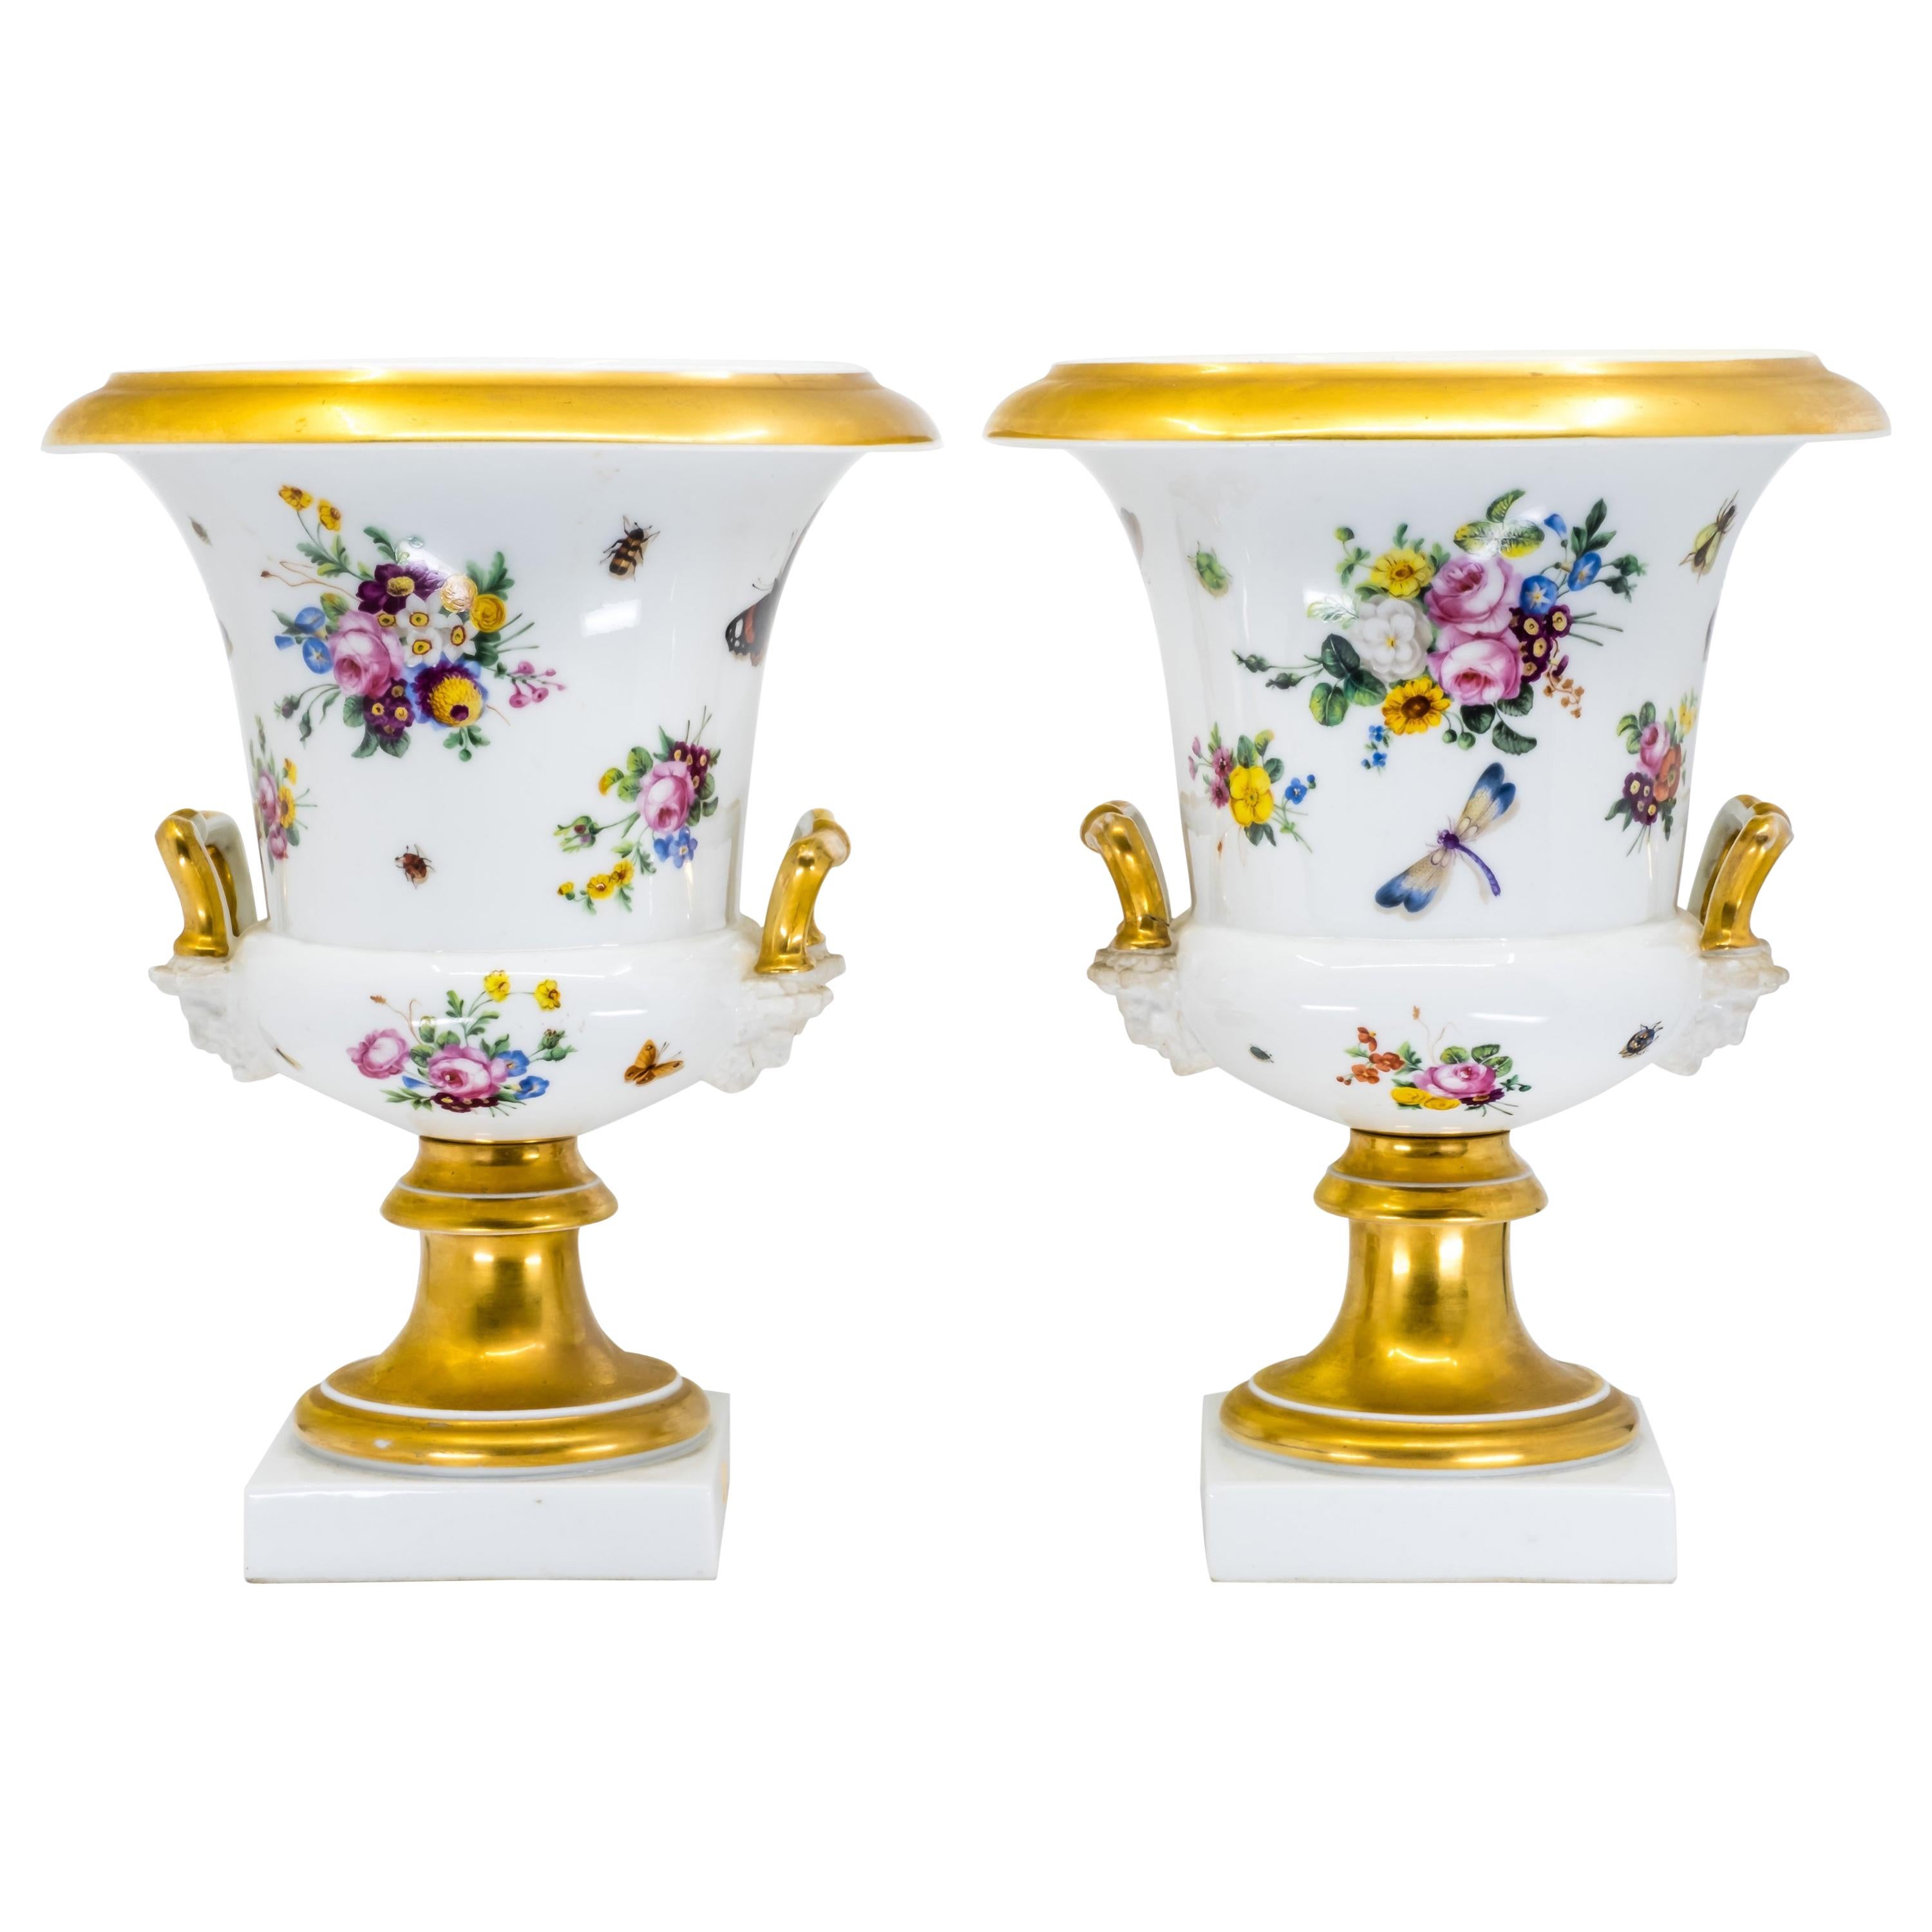 Pair of Medici Vases, Hand Painted Porcelain, French, 19th Century